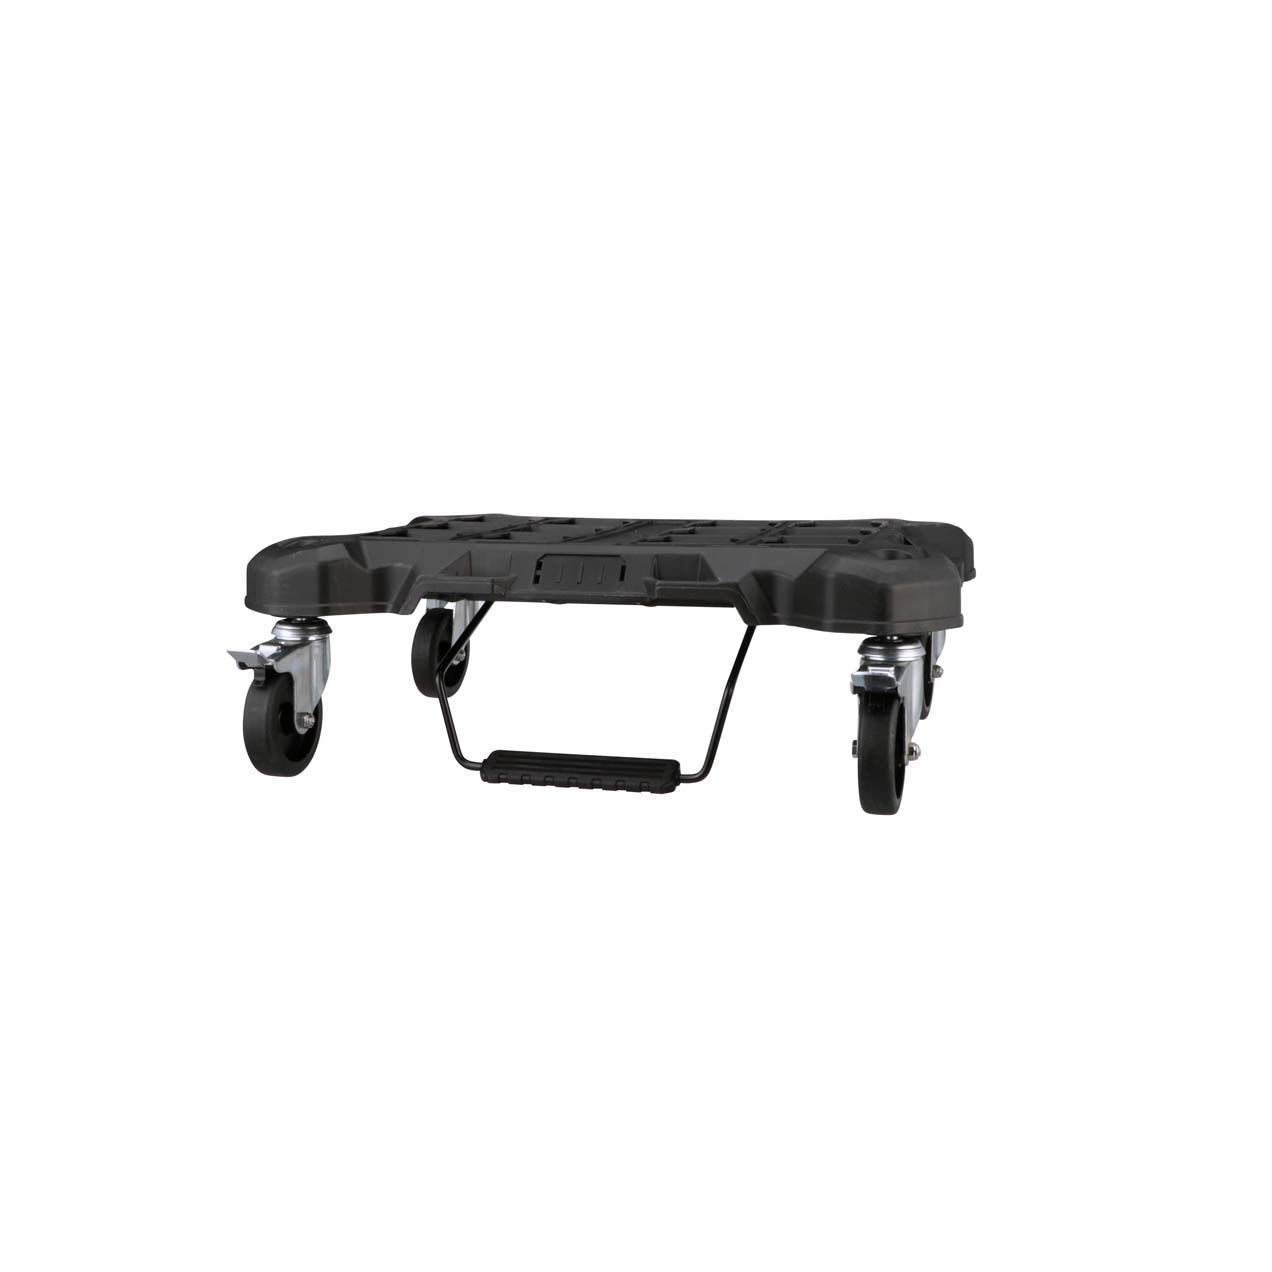 Milwaukee PACKOUT 18.8 In. W x 24.4 In. L Platform Cart, 250 Lb. Capacity